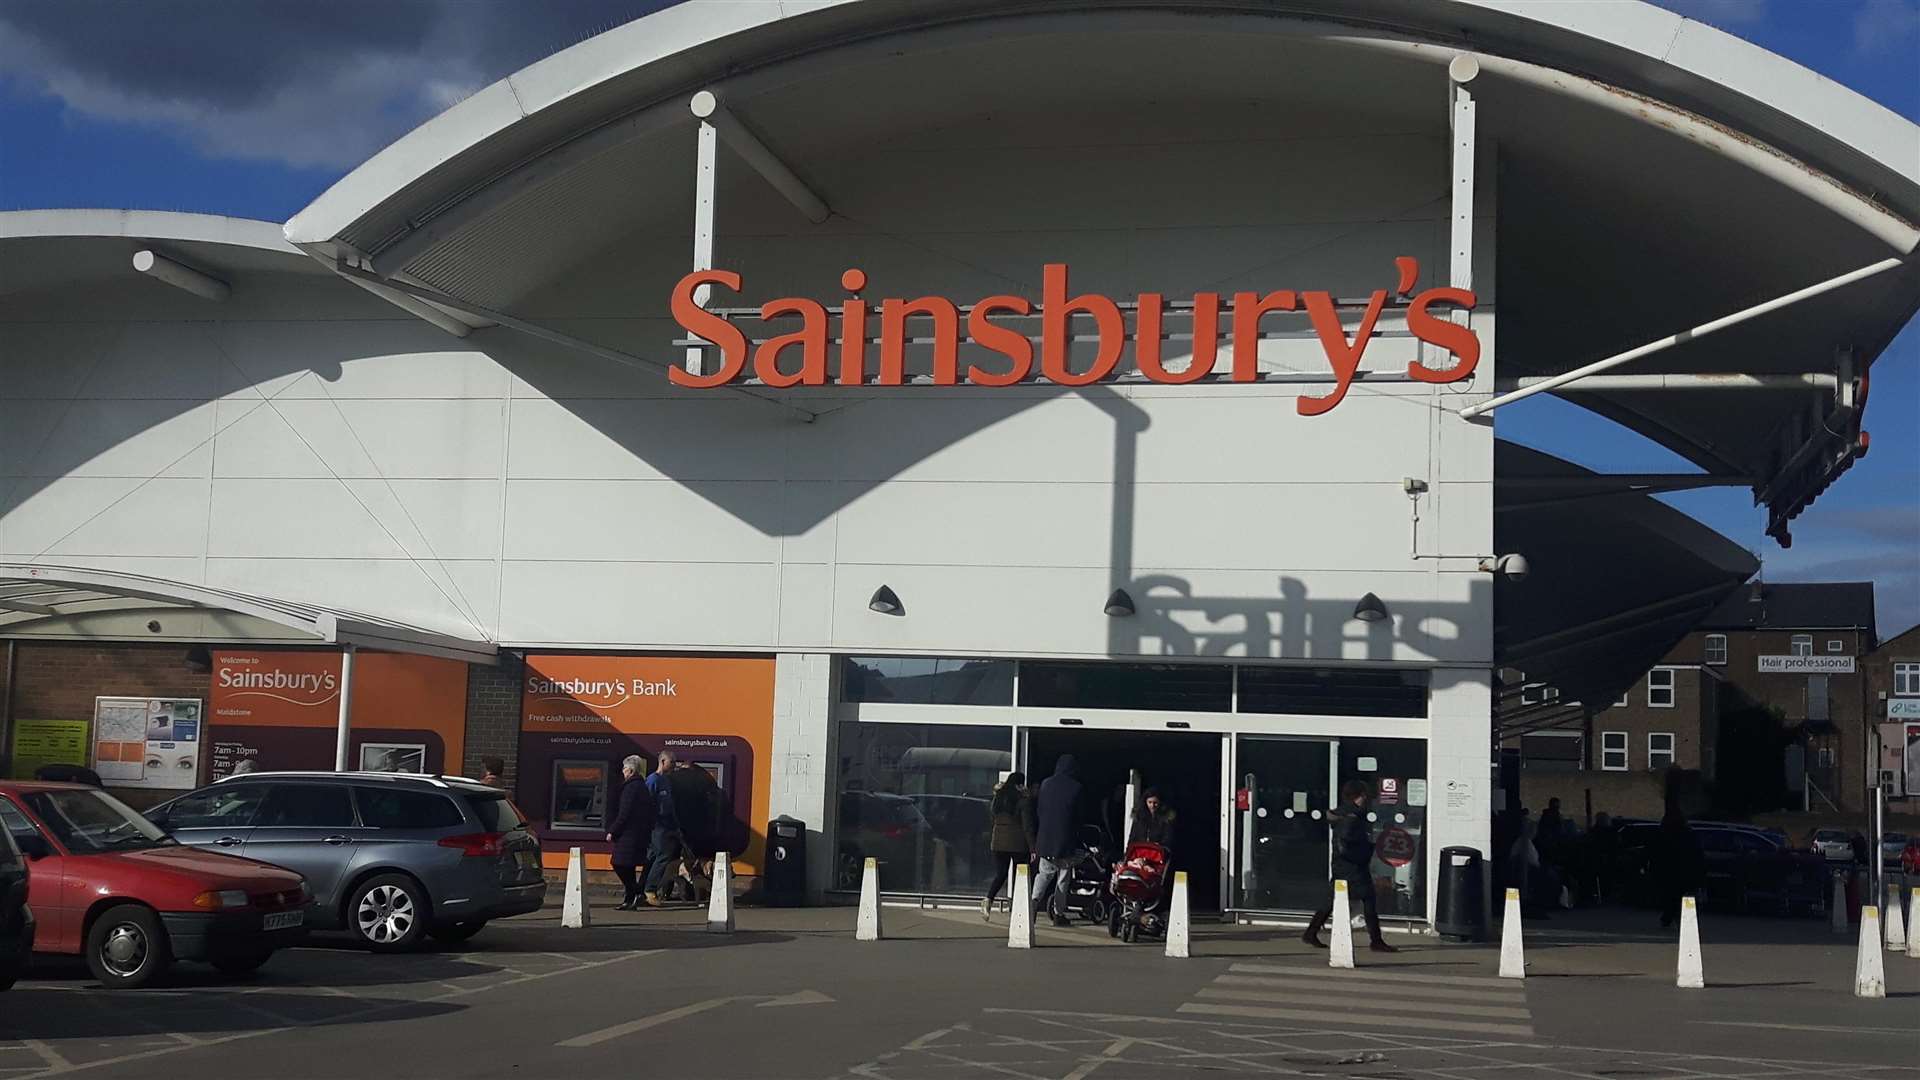 Sainsbury's is to merge with rival Asda